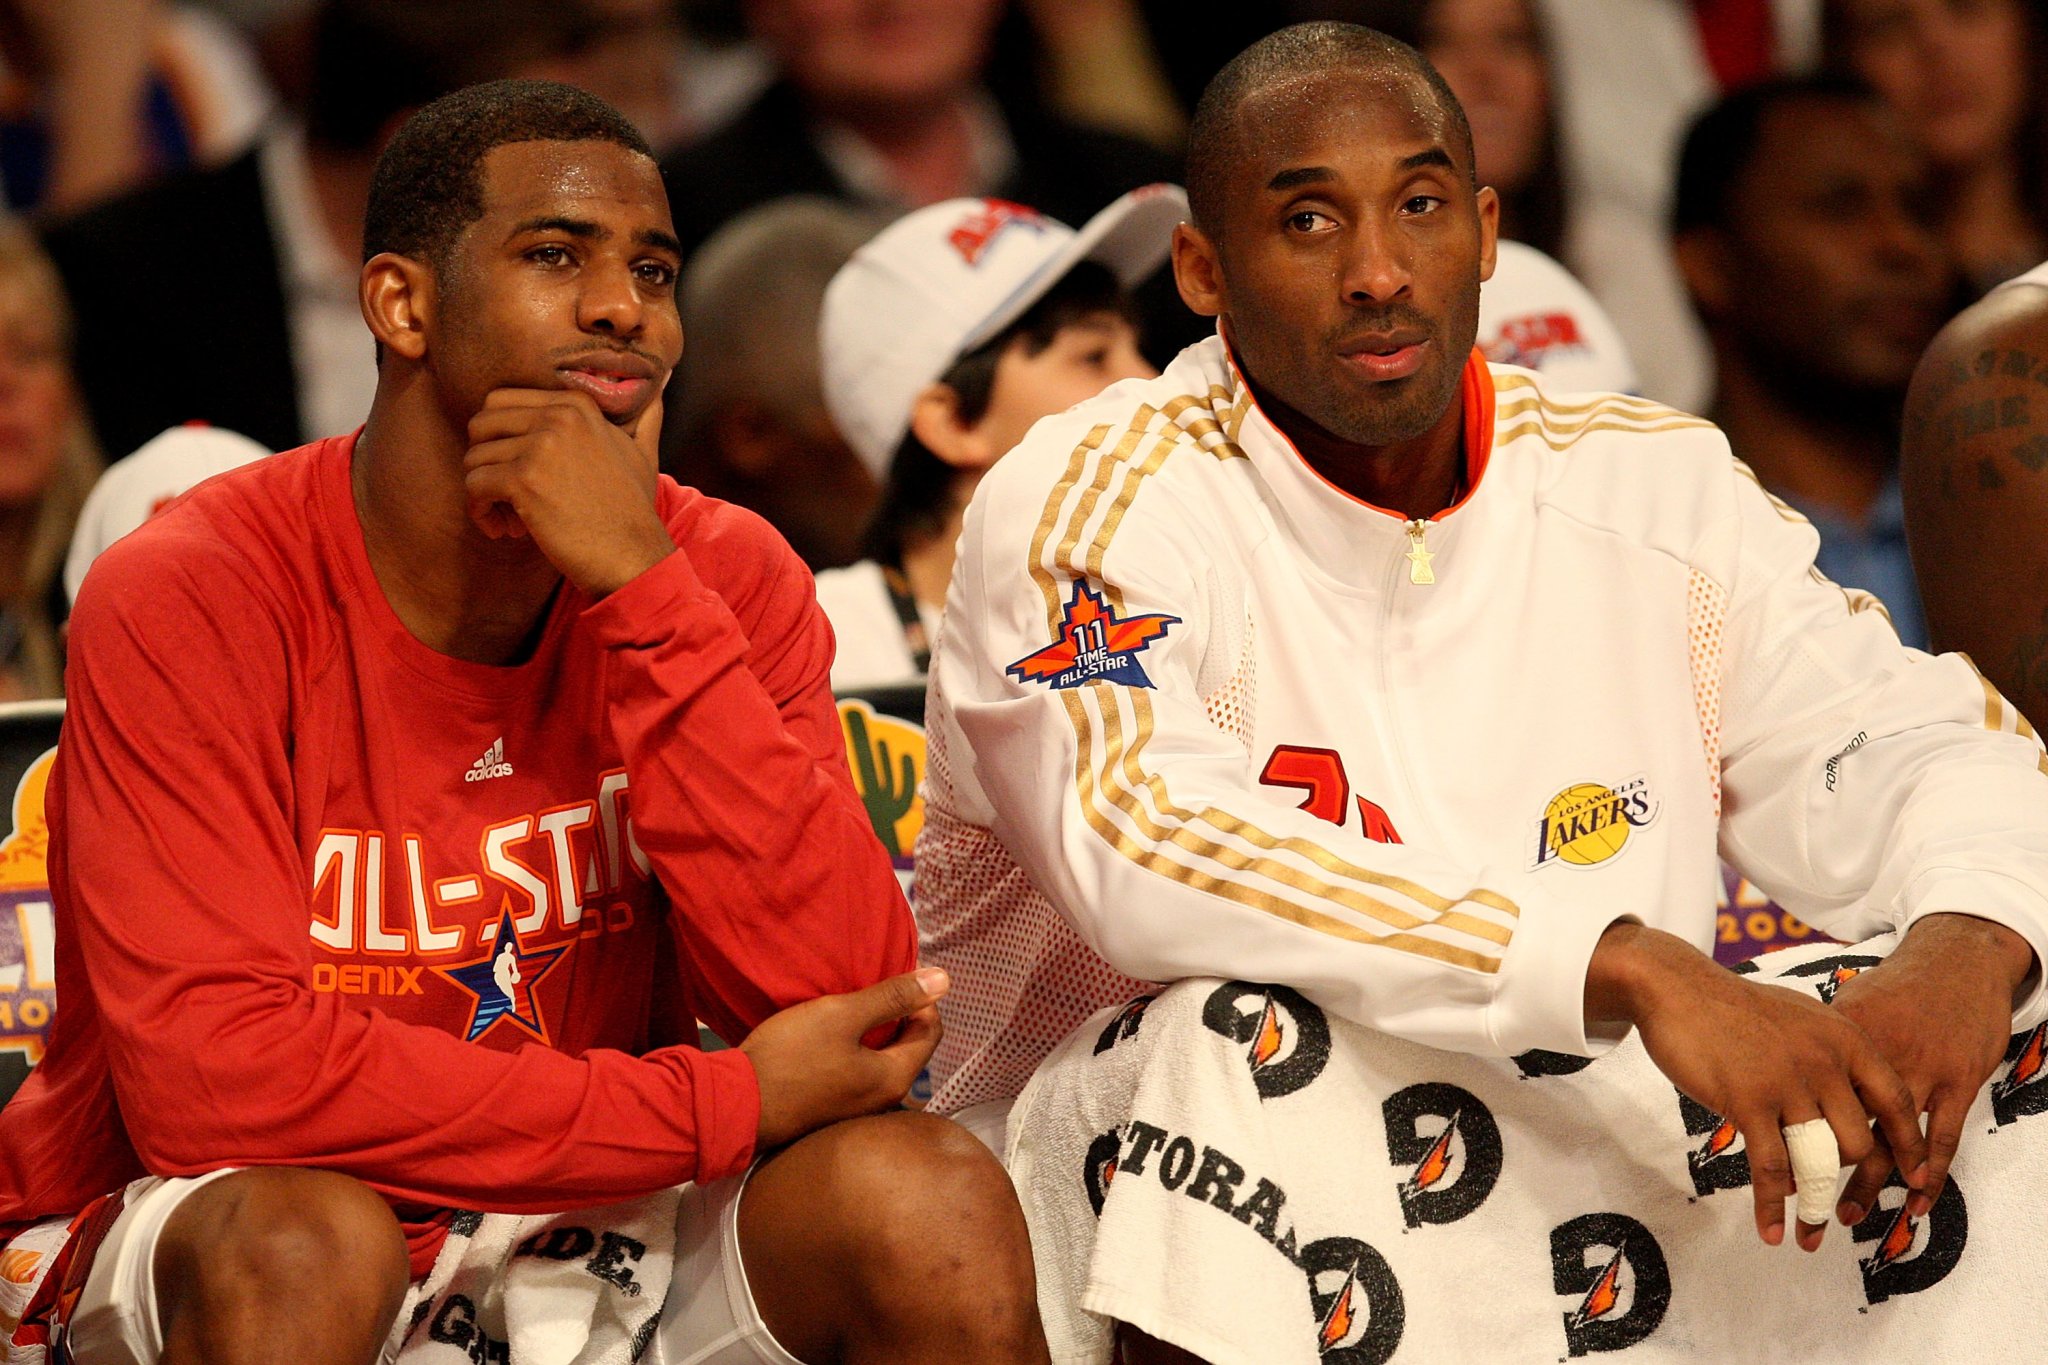 Chris Paul Describes How Pissed Off He Was About The Trade To Lakers In 2011 Being Vetoed By League